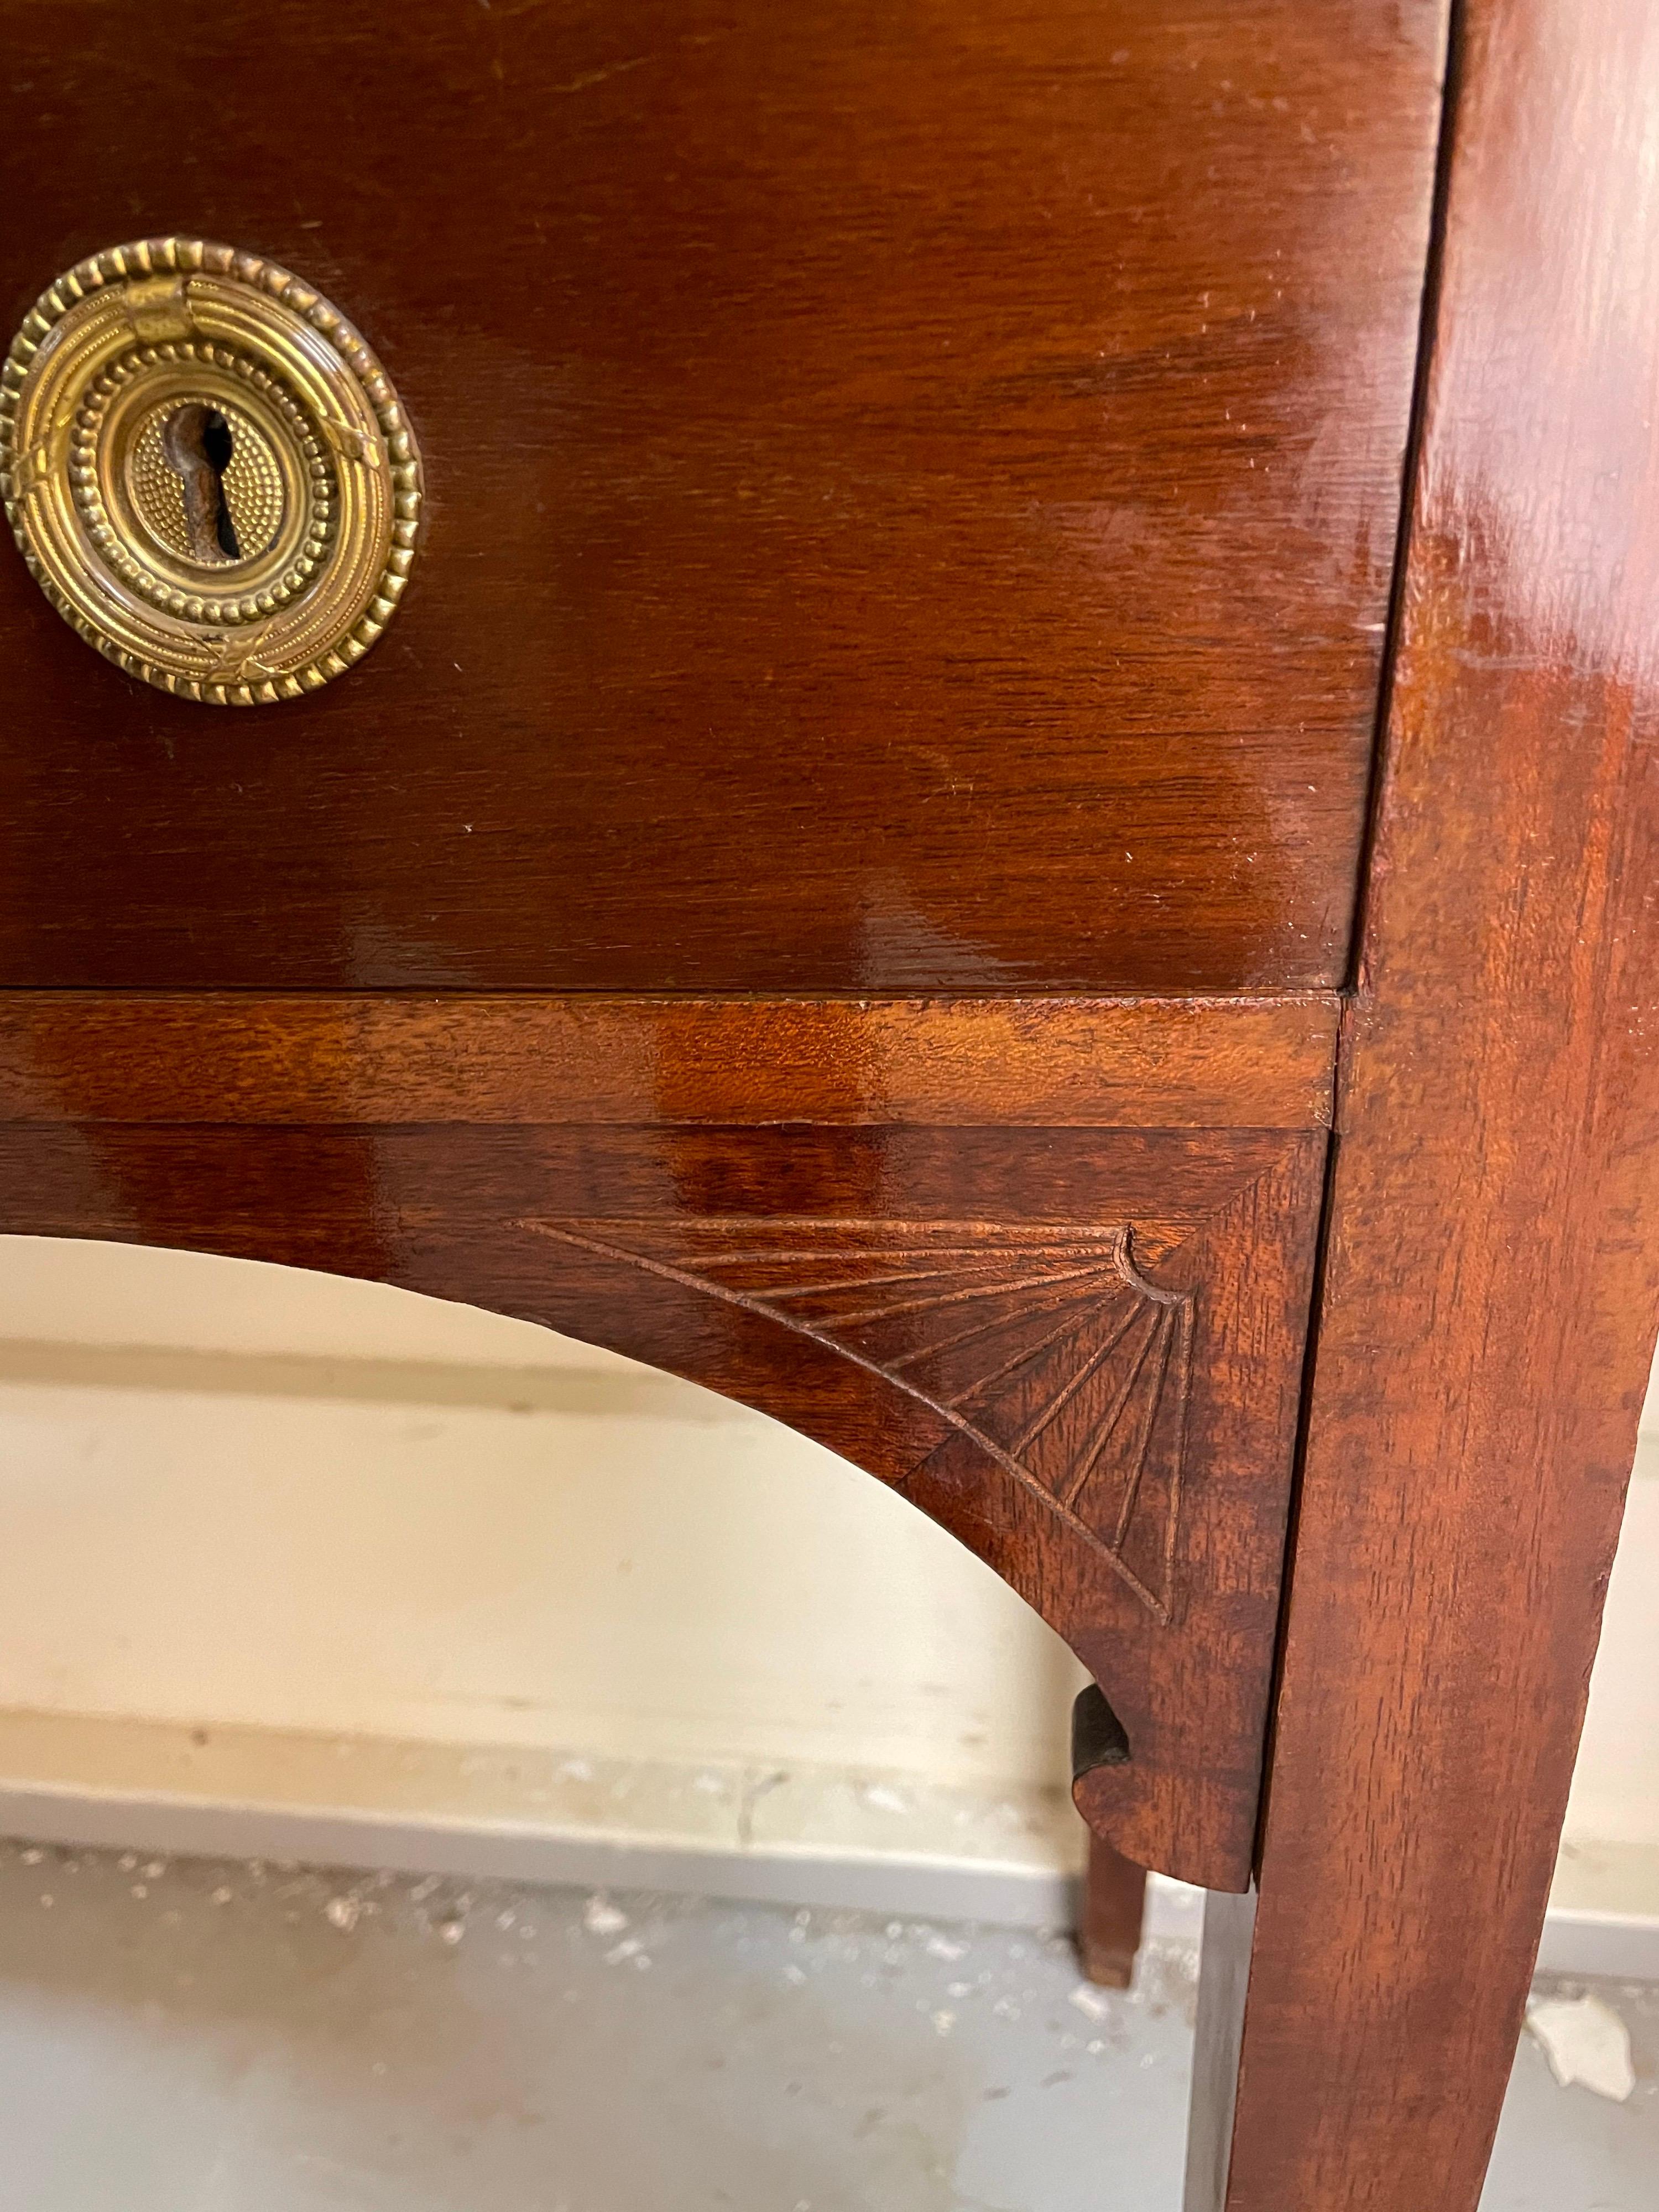 Hand-Carved Art Nouveau Mahogany Vanity Desk And Mirror Made In Sweden For Sale